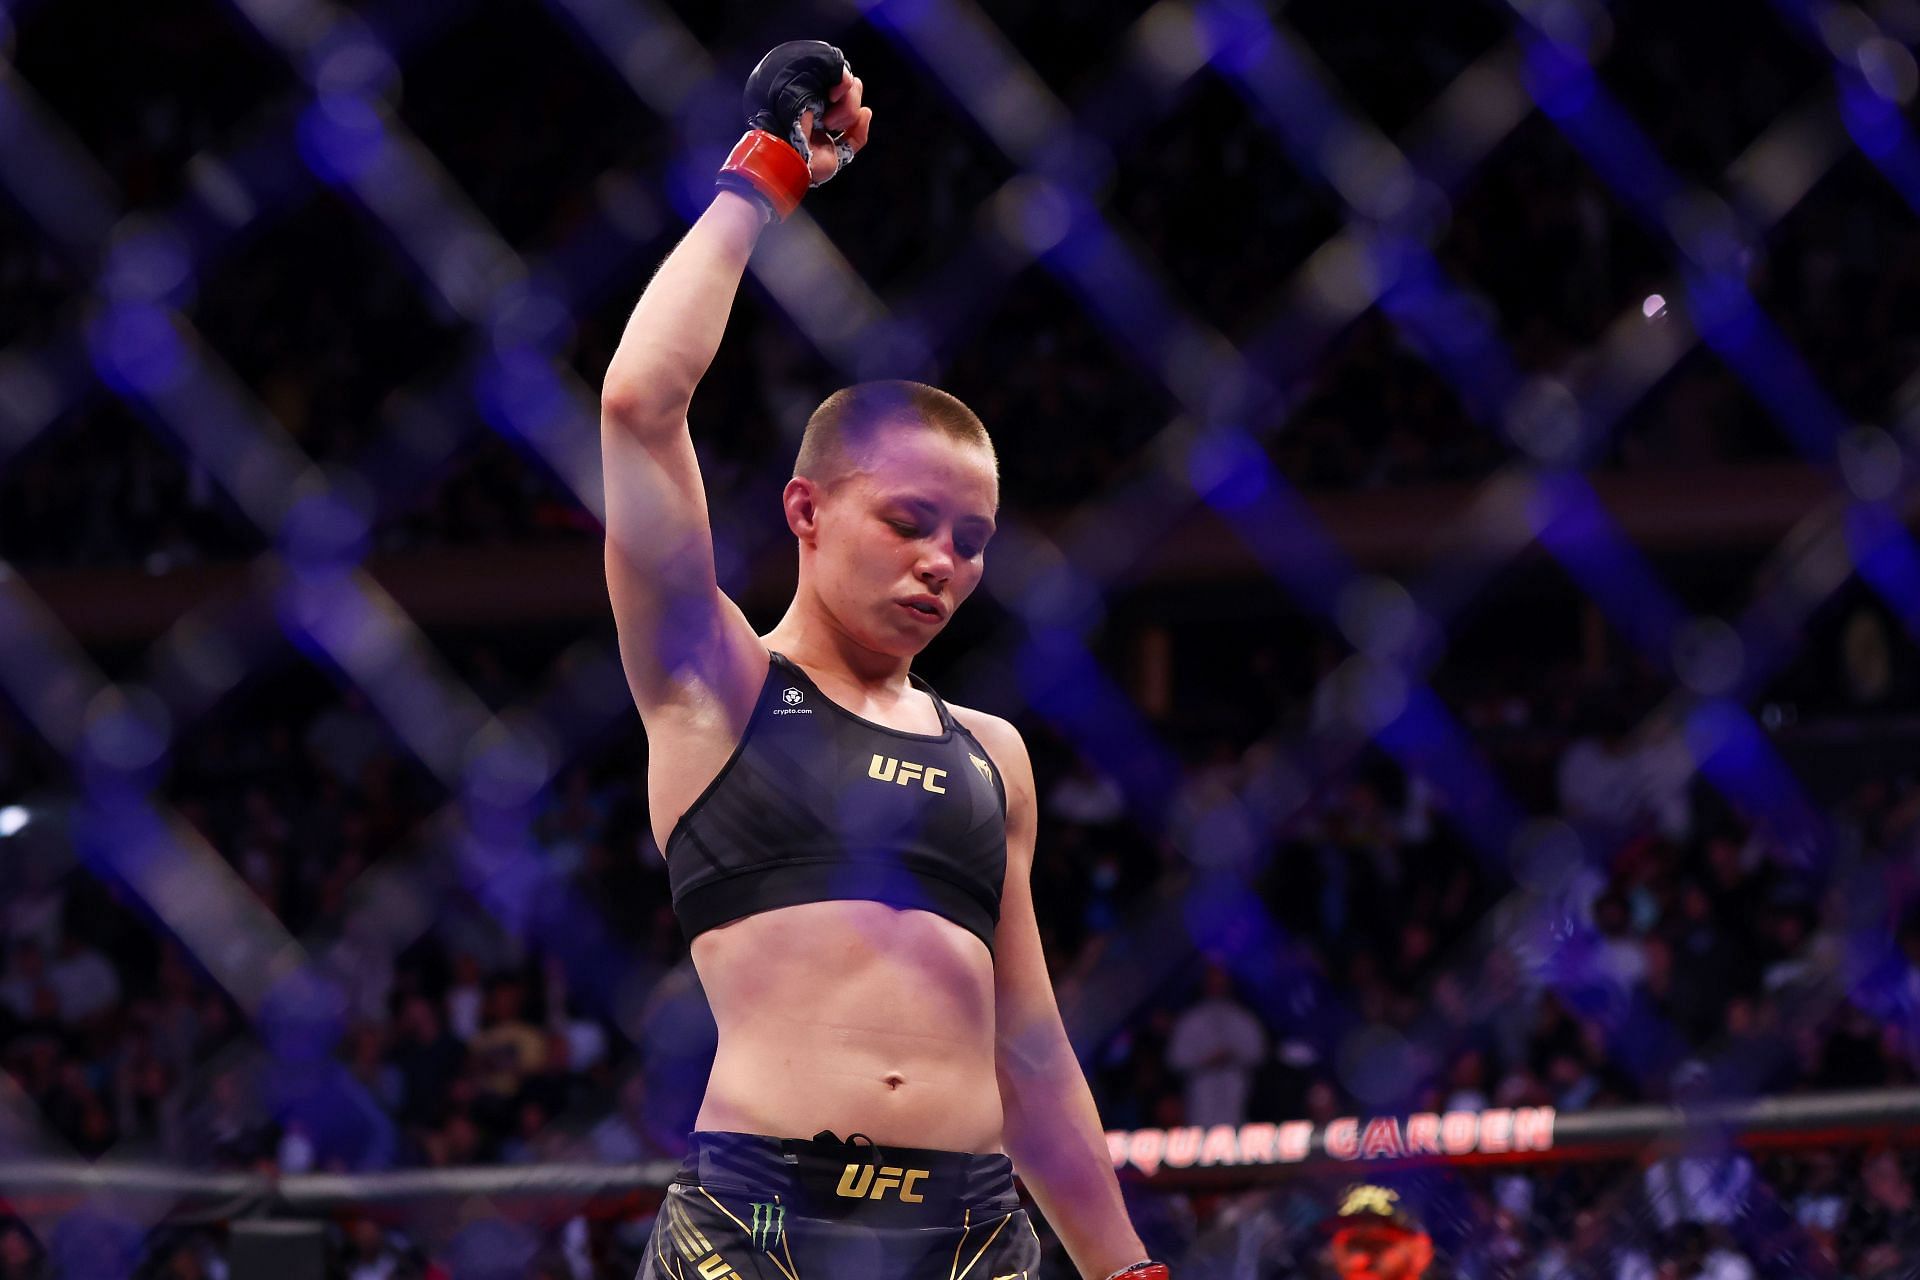 Is Rose Namajunas still the best strawweight in the world?